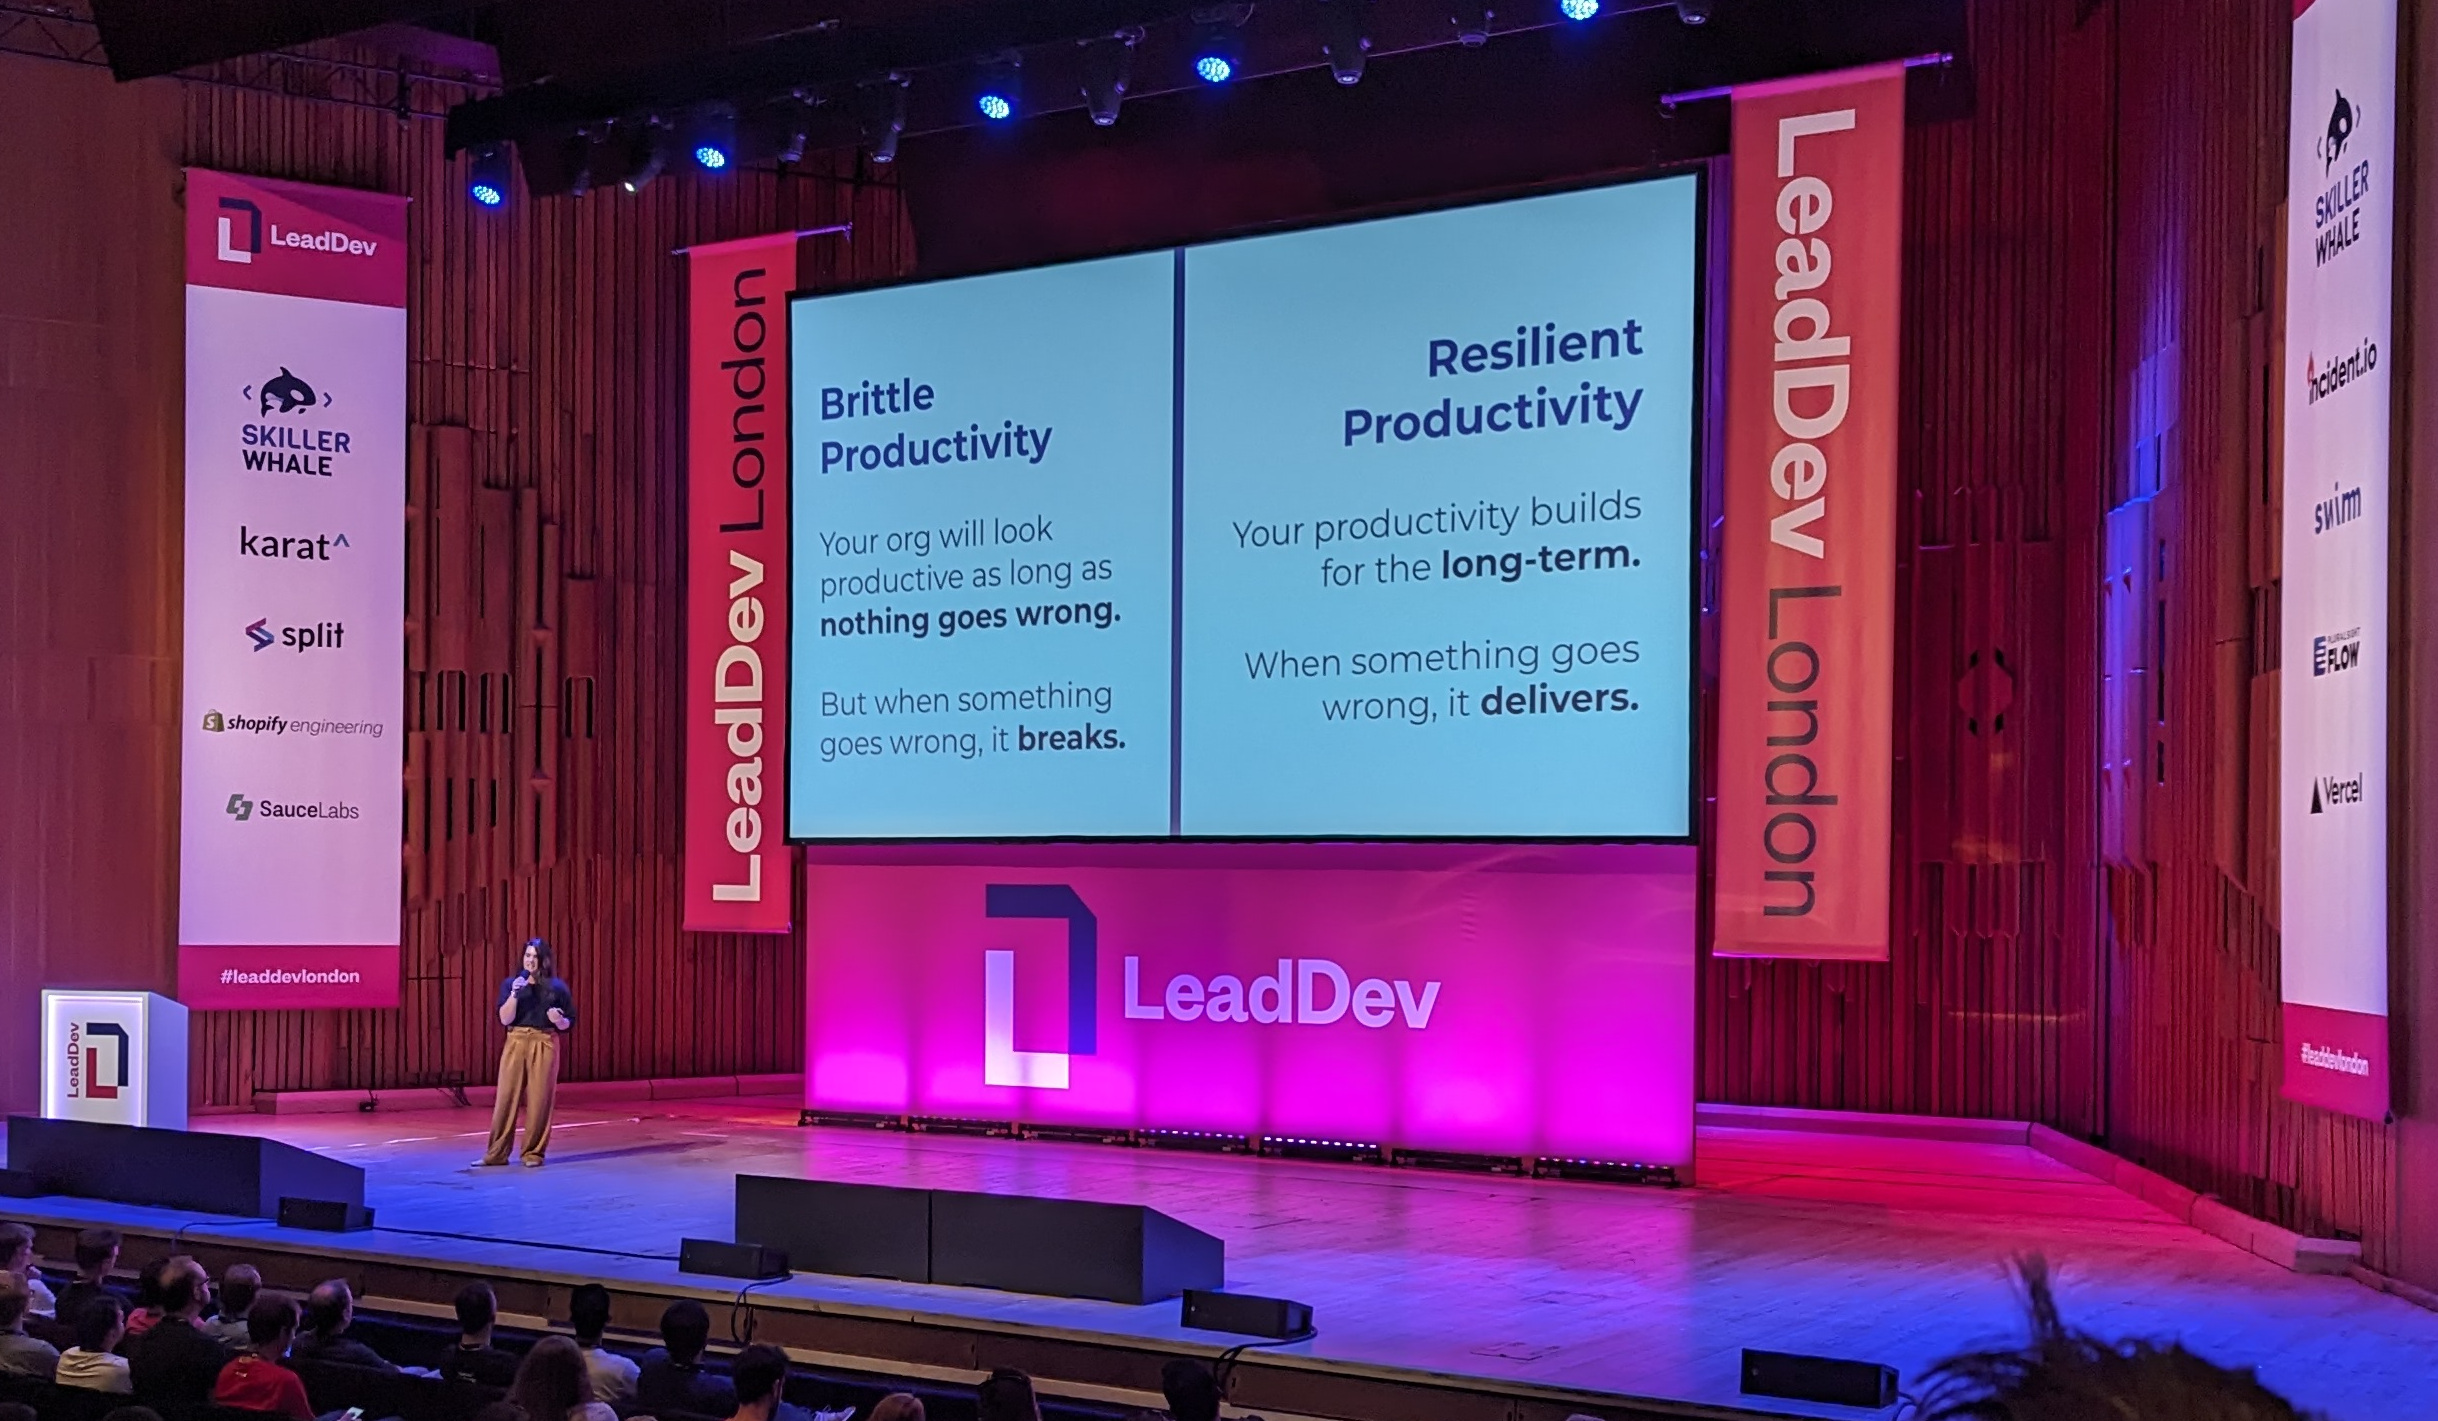 Cat Hicks on the stage at LeadDev in front of a slide that's split in two. On the left hand side, the title "Brittle Productivity", and under it "Your org will look productive as long as nothing goes wrong. But when something goes wrong, it breaks". On the right hand side, the title "Resilient Productivity" and under it "Your productivity builds for the long-term. When something goes wrong, it delivers"